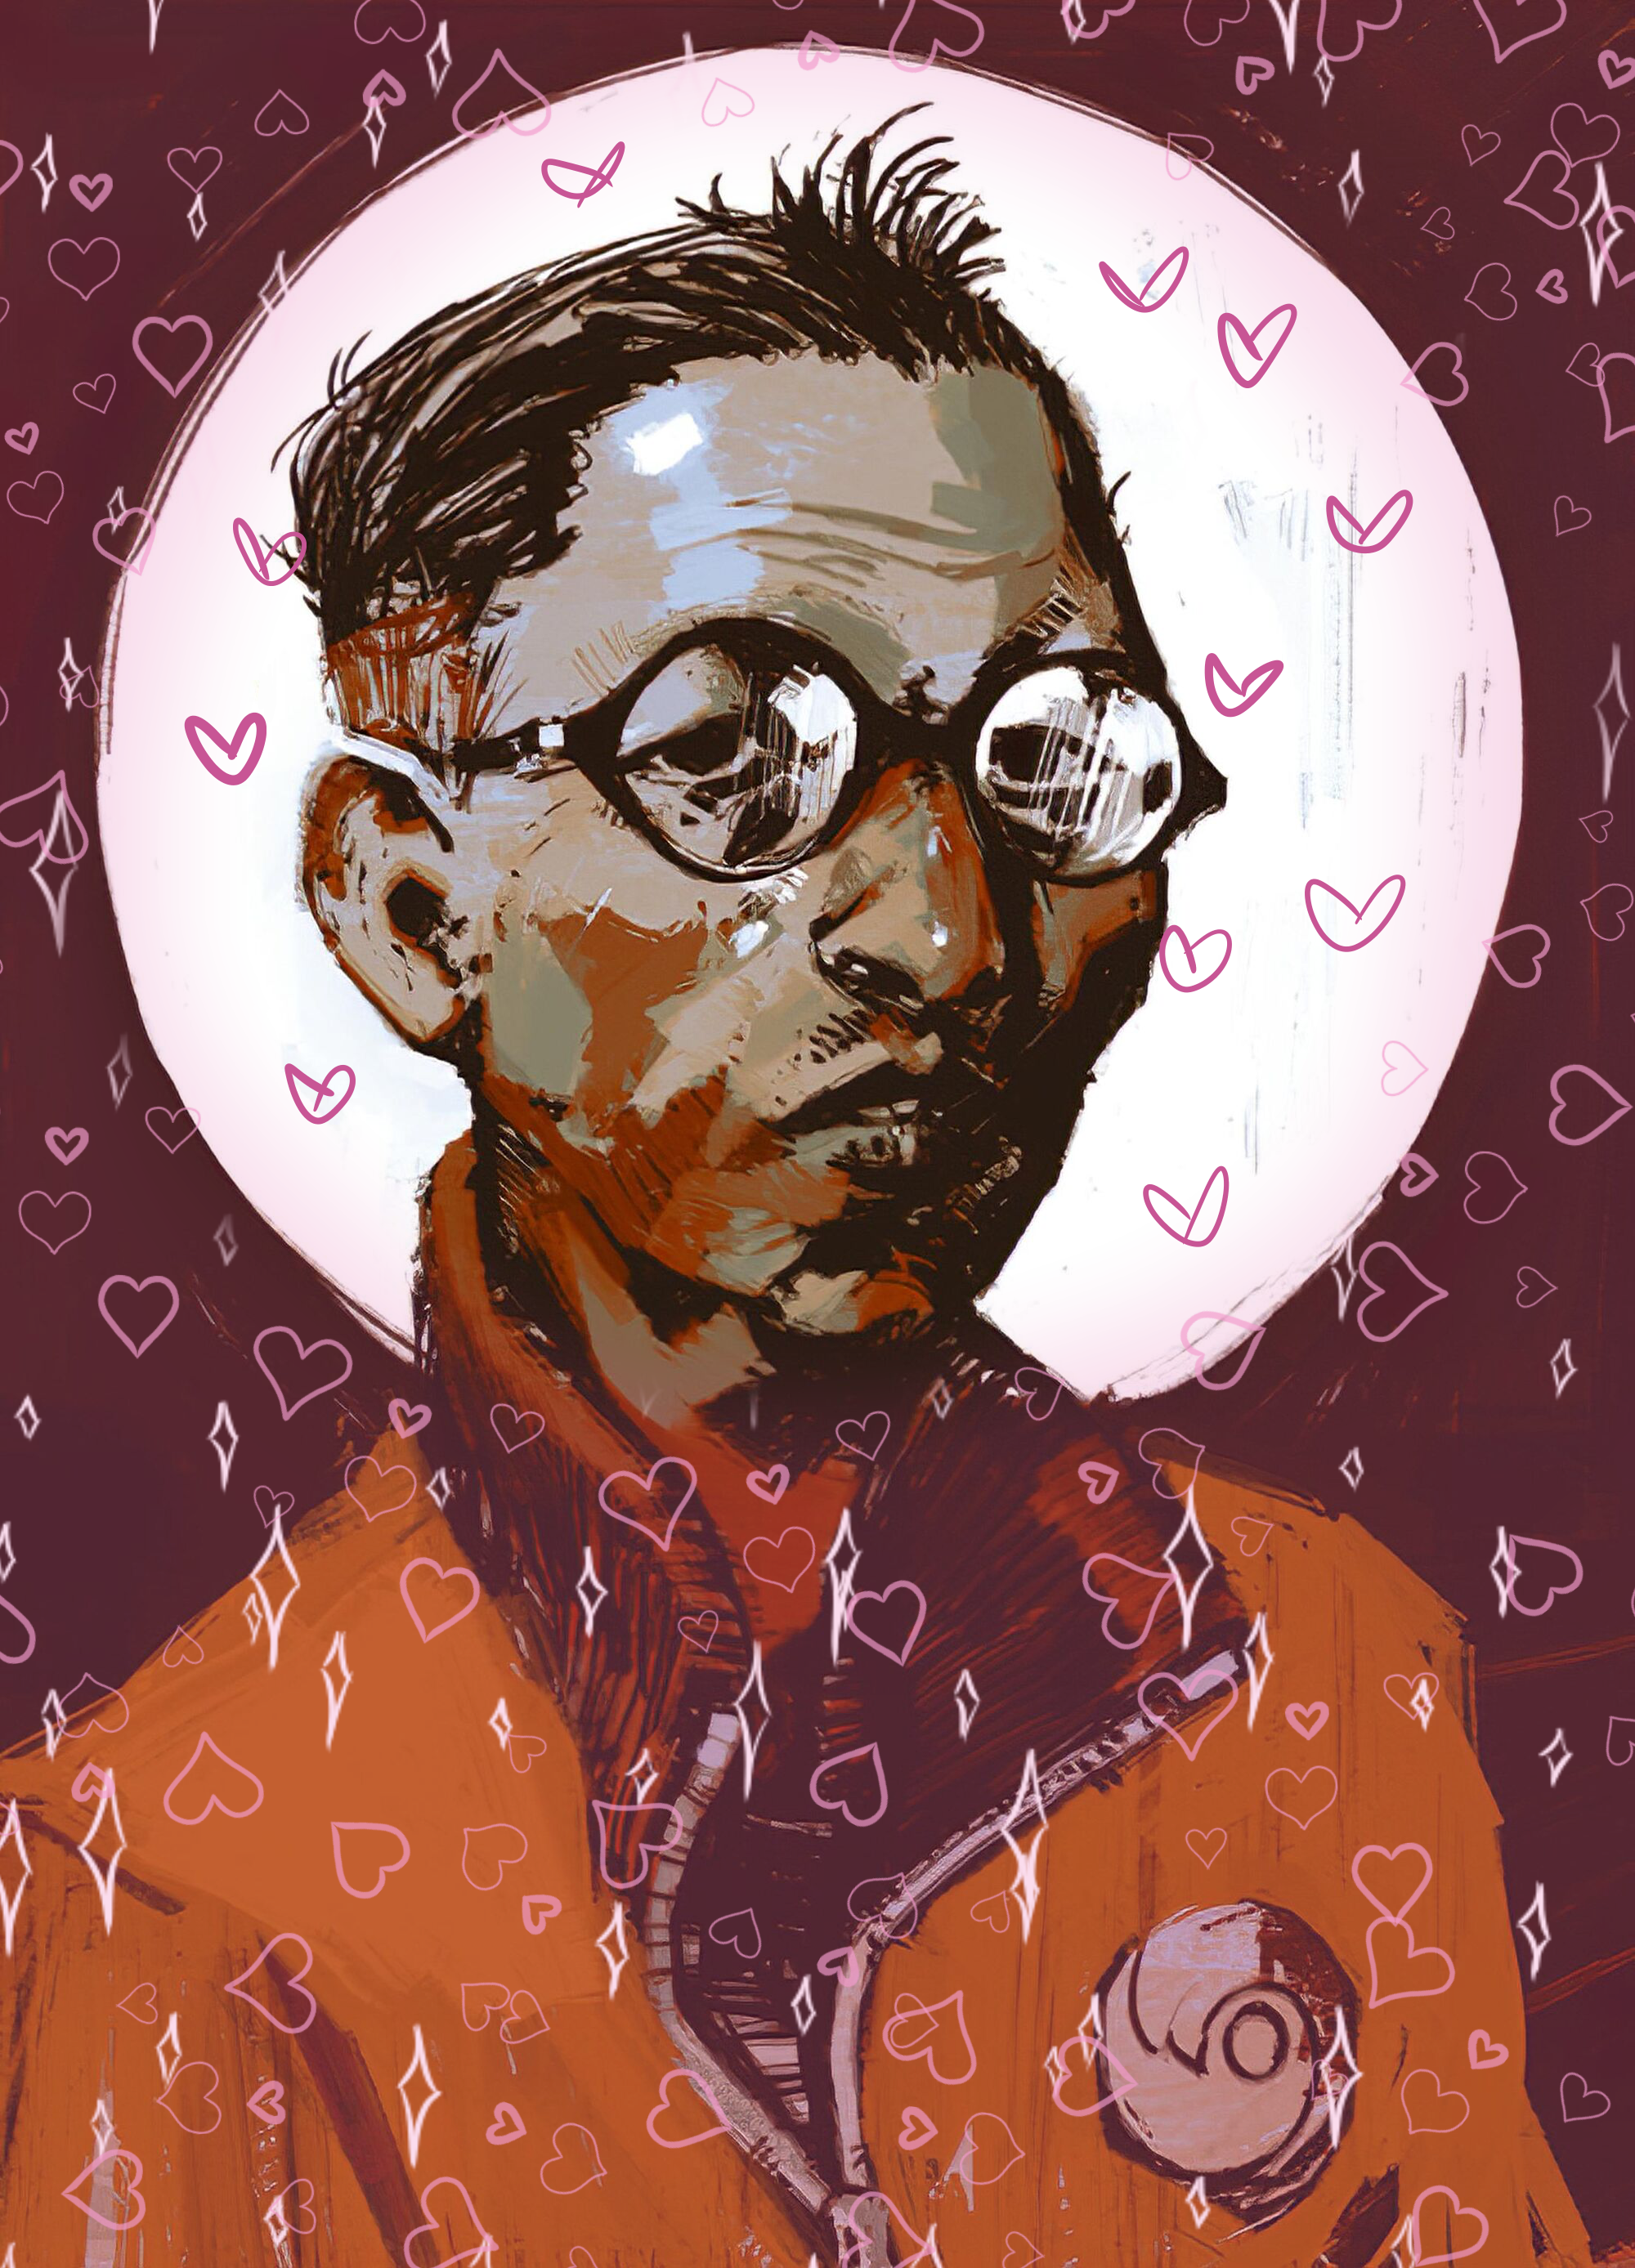 An edited picture of Kim Kitsuragi from Disco Elysium. He is an Asian man with a serious look on his face and a white circle behind his head. The image is overlaid with hearts and sparkles in varying shades of pink. There is a transparent pink overlay on the picture.